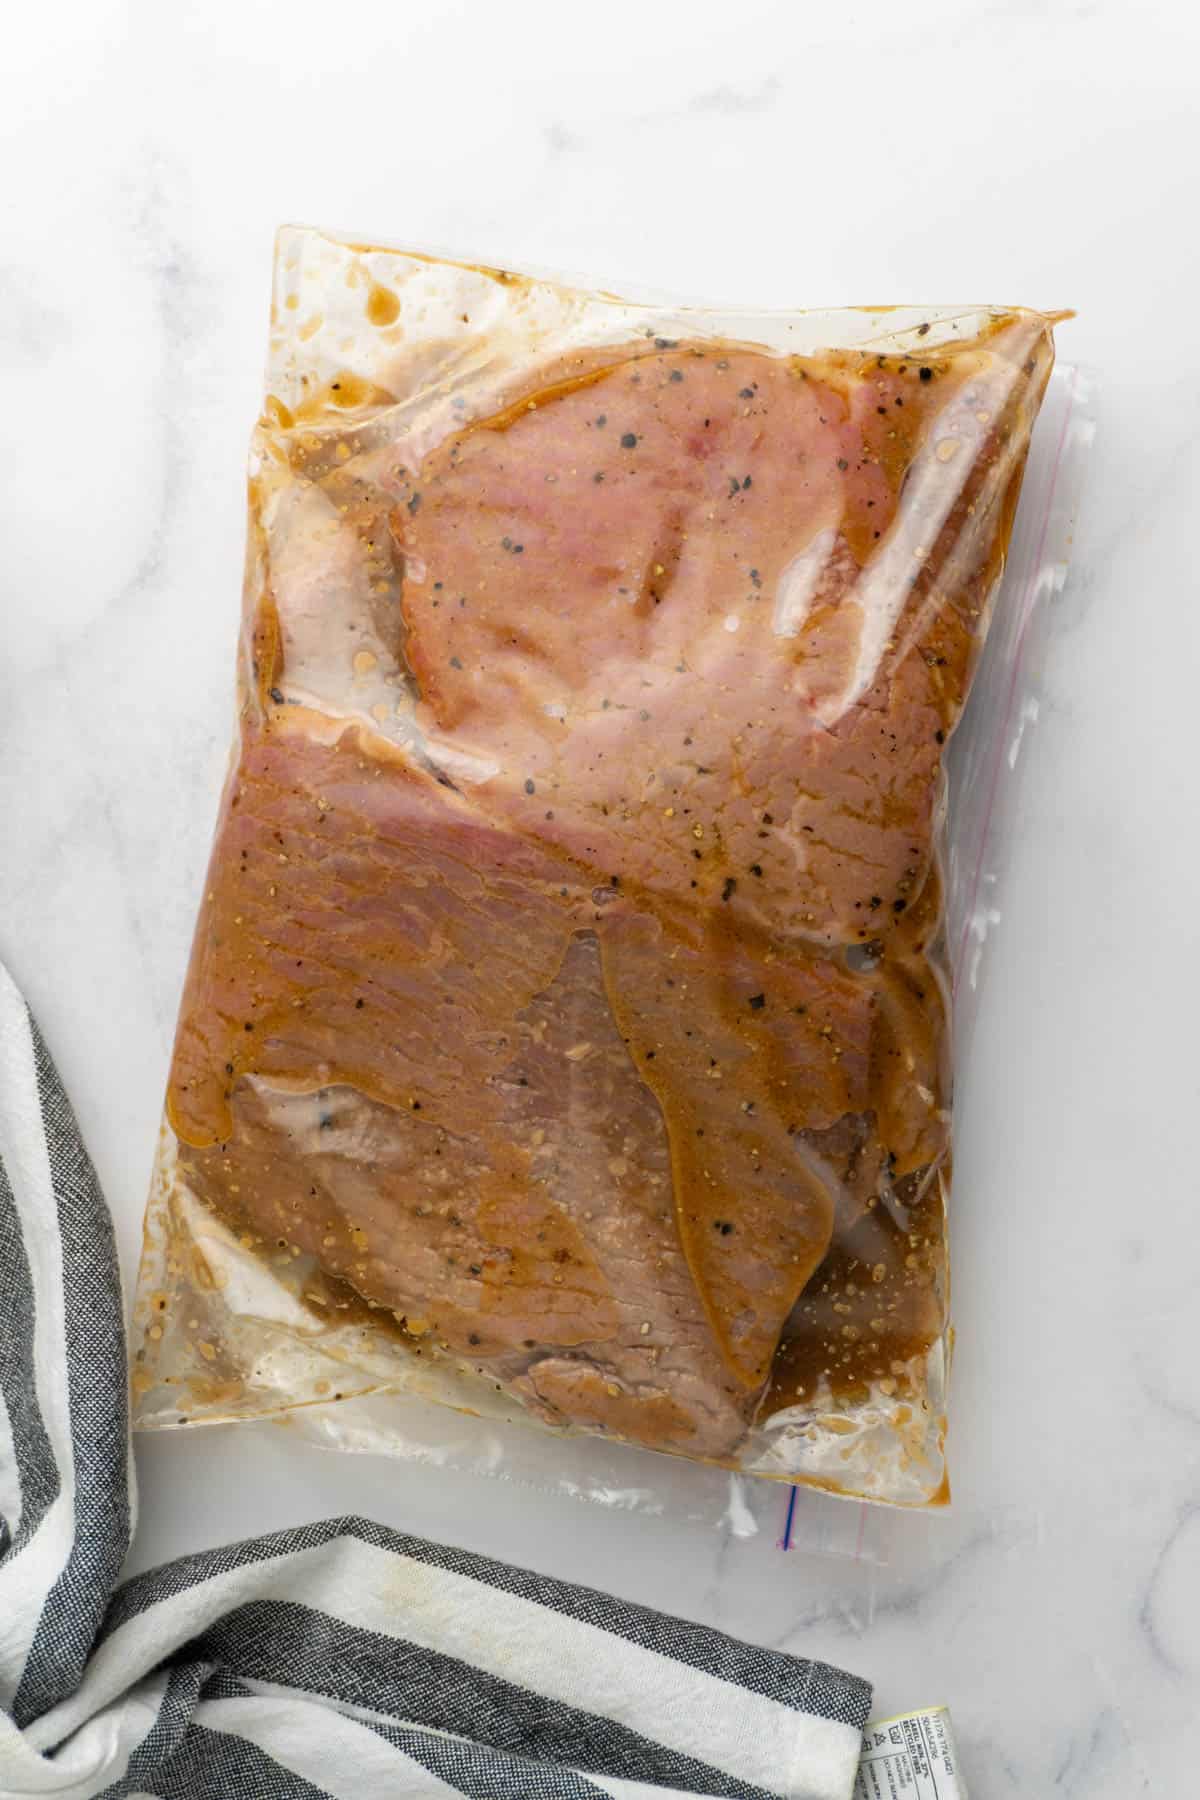 Cube steaks in a sealed zipper bag are marinating.